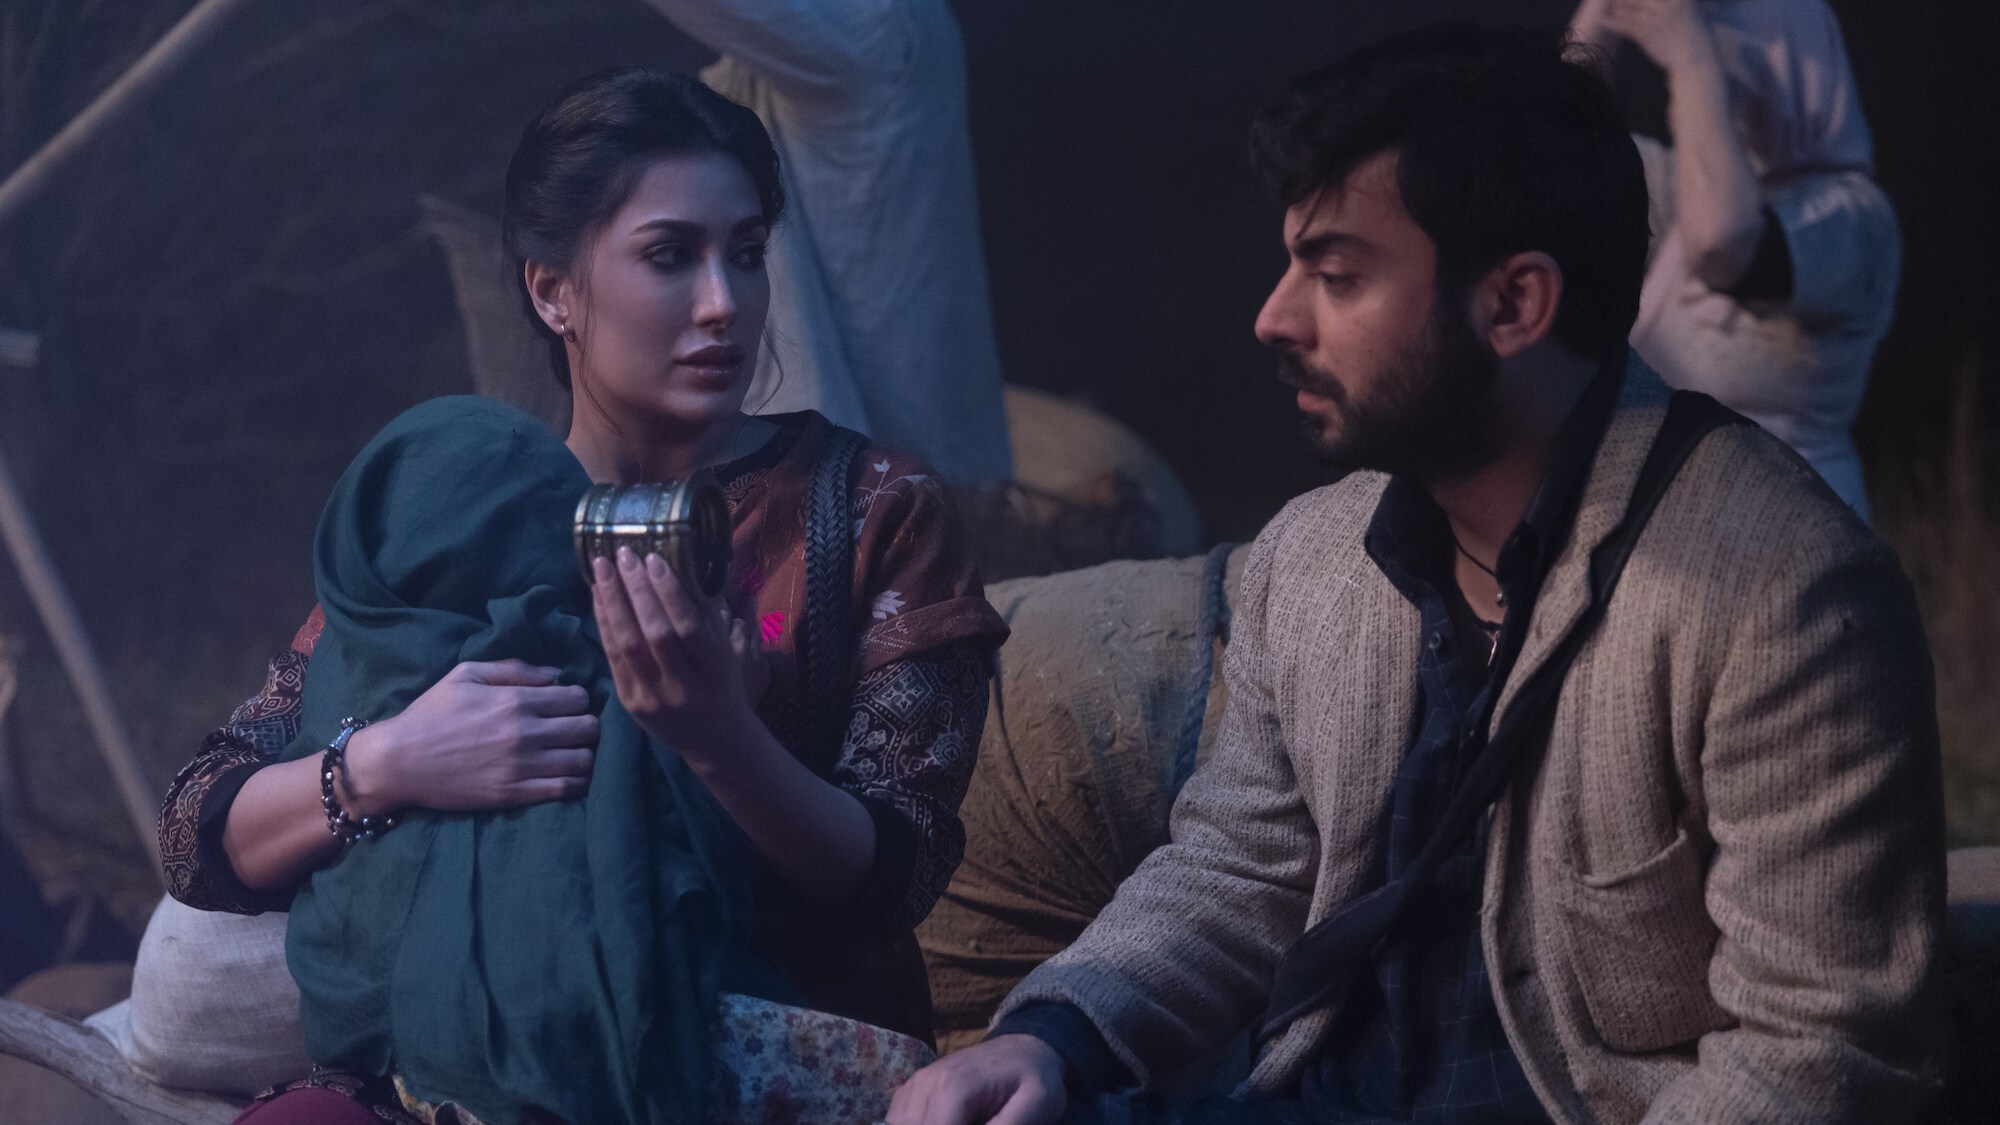 (L-R): Mehwish Hayat as Aisha and Fawad Kahn as Hasan in Marvel Studios' MS. MARVEL, exclusively on Disney+. Photo by Chuck Zlotnick. ©Marvel Studios 2022. All Rights Reserved.